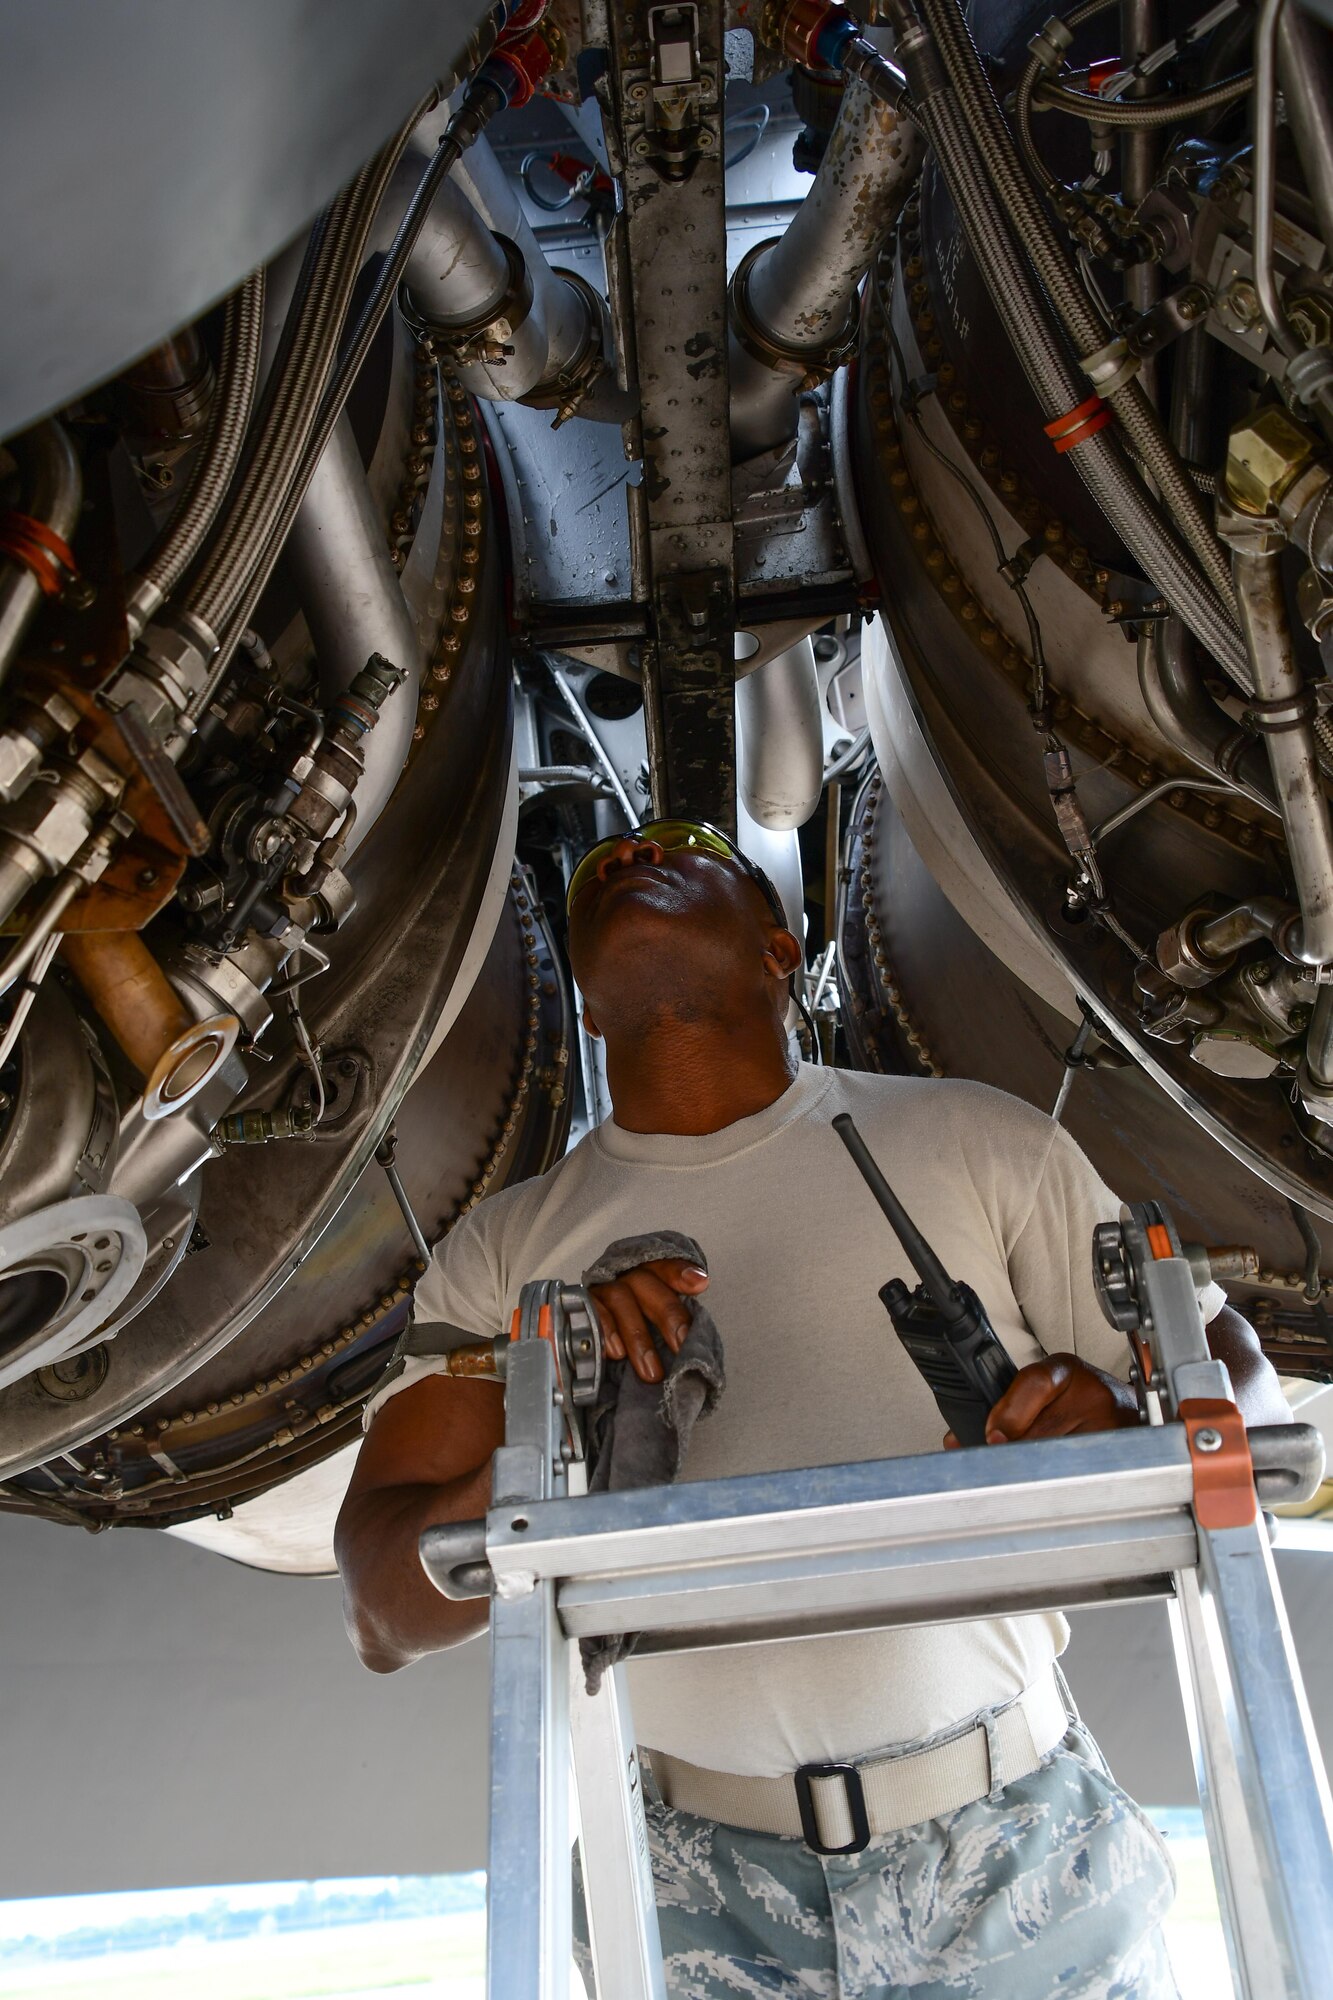 Master Sgt. Ron Harris, assigned to the 307th Maintenance Squadron, checks for leaks on two engines of a B-52 Stratofortress prior to performing an engine run on Barksdale Air Force Base, La. June 29, 2017. All eight Pratt and Whitney Turbofan Engines are carefully inspected before the bomber is returned to service after a phase inspection. (U.S. Air Force photo by Master Sgt. Dachelle Melville/Released)